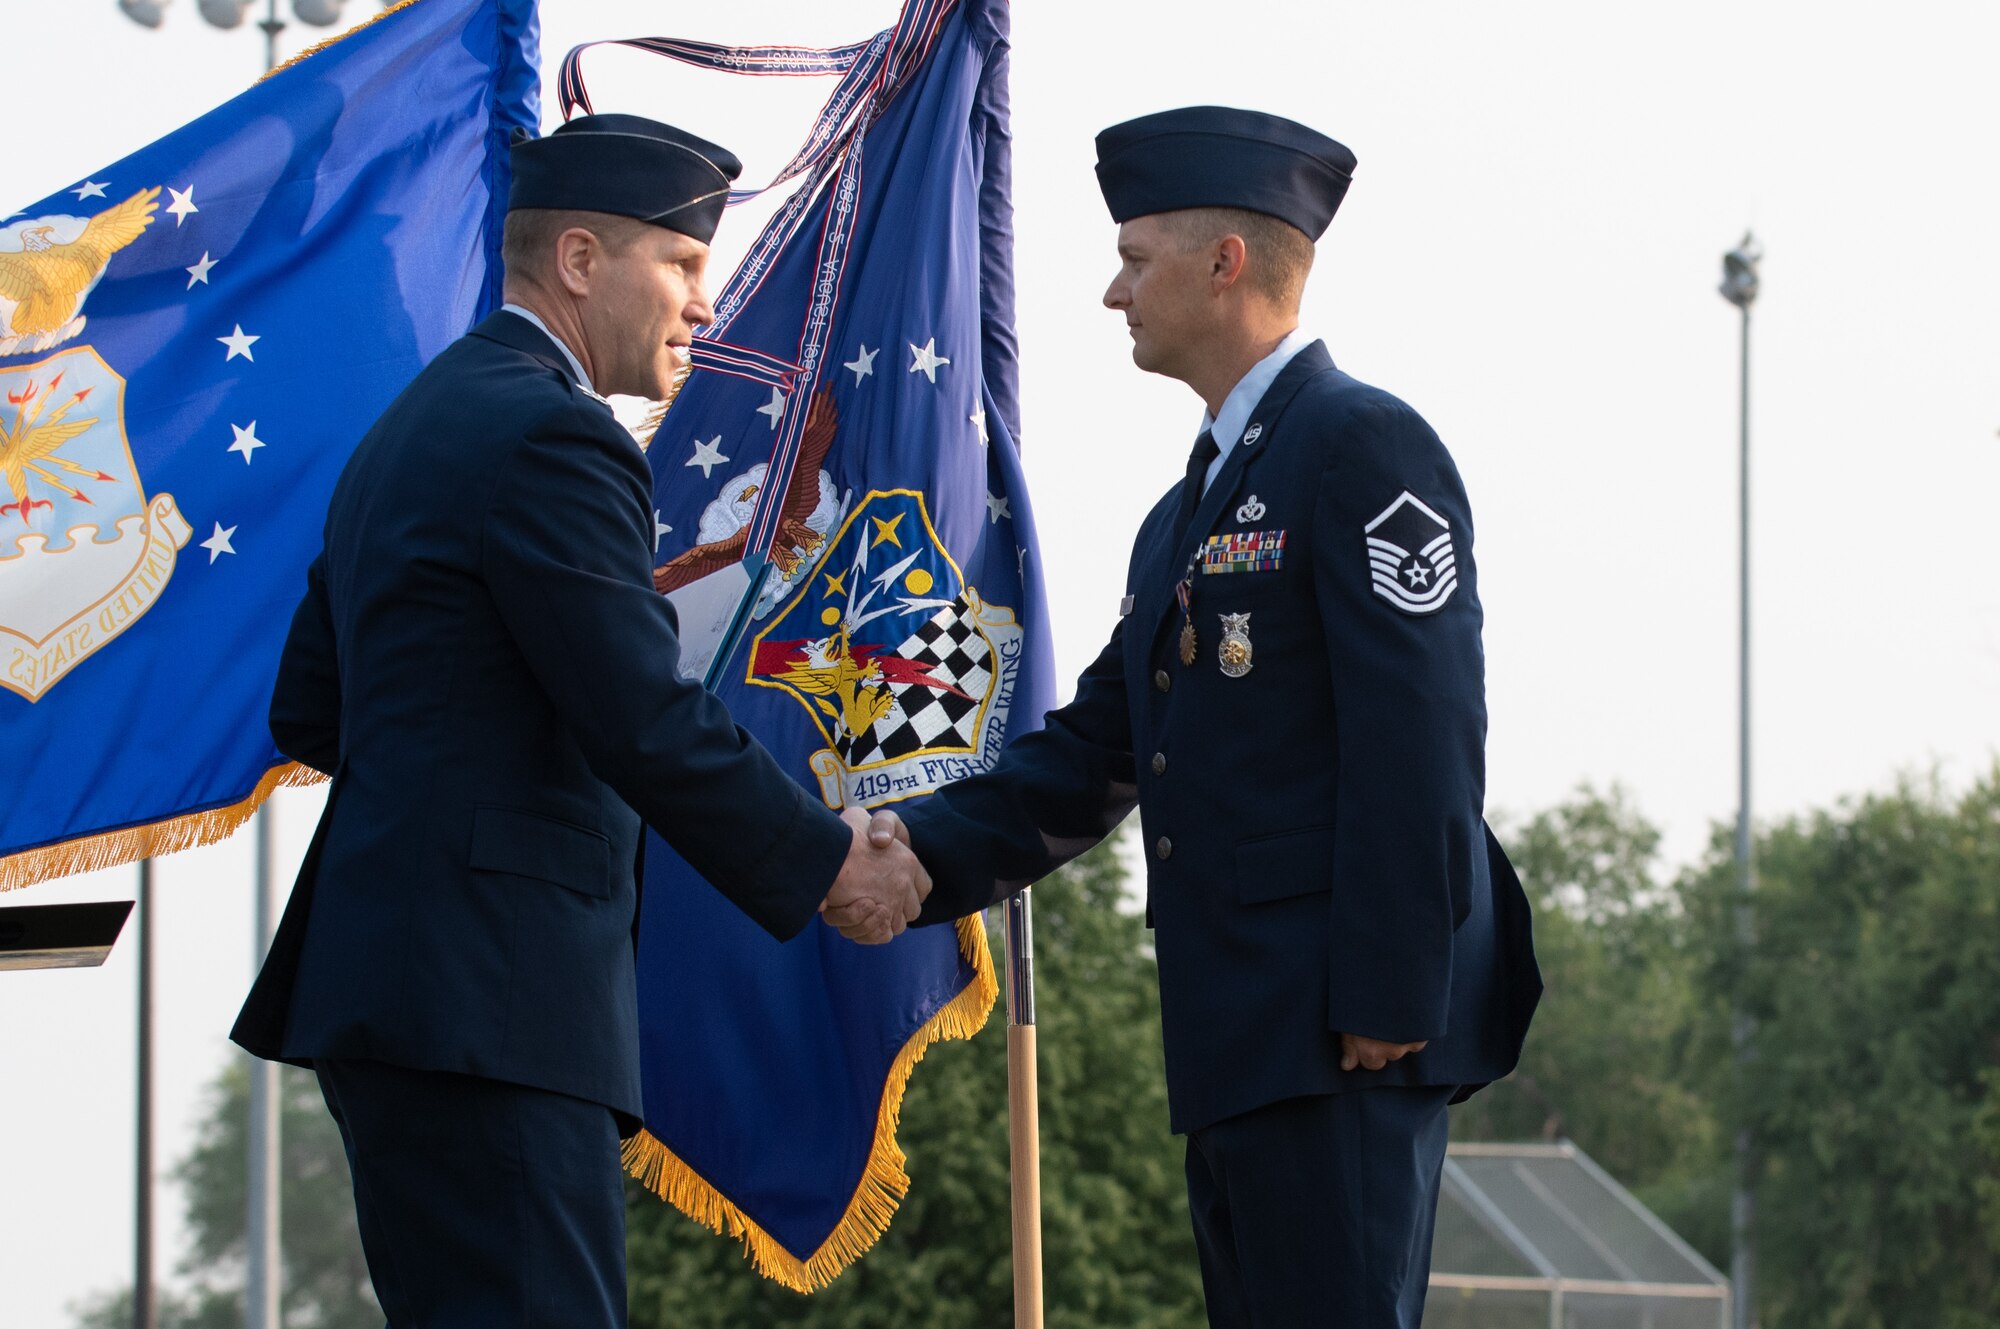 U.S. Air Force Master Sgt. Justin Rogers, 419th Civil Engineer Squadron, receives the Airman’s Medal from Col. Matthew Fritz, 419th Fighter Wing commander, during a ceremony at Hill Air Force Base, Utah on July 11, 2021. Rogers displayed exemplary heroism actions when he saved the life of a trapped driver by pulling him from a burning vehicle.